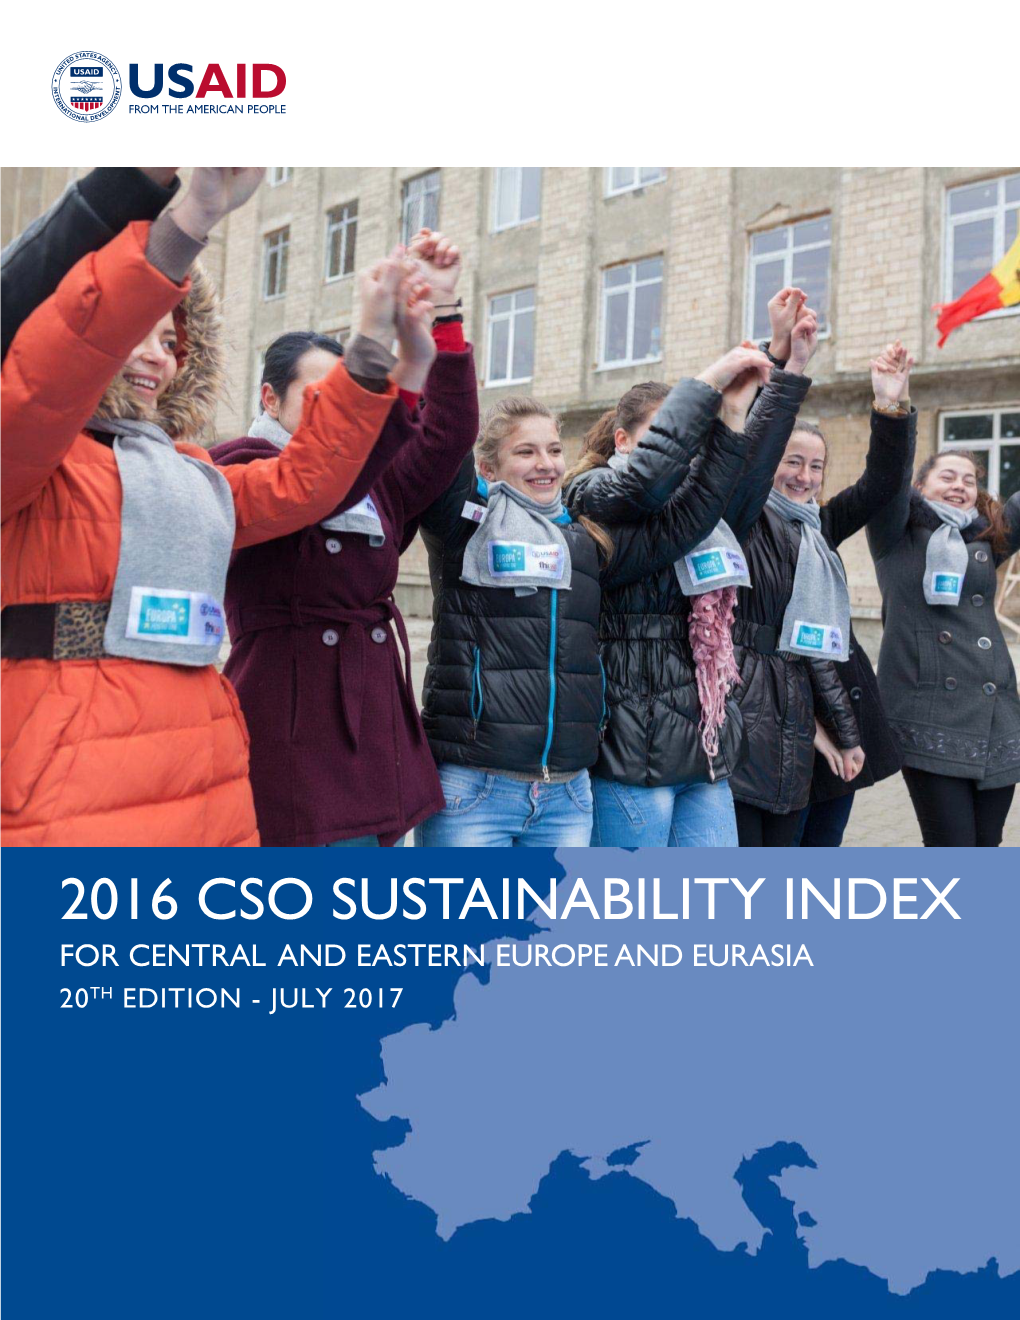 2016 Cso Sustainability Index for Central and Eastern Europe and Eurasia 20Th Edition - July 2017